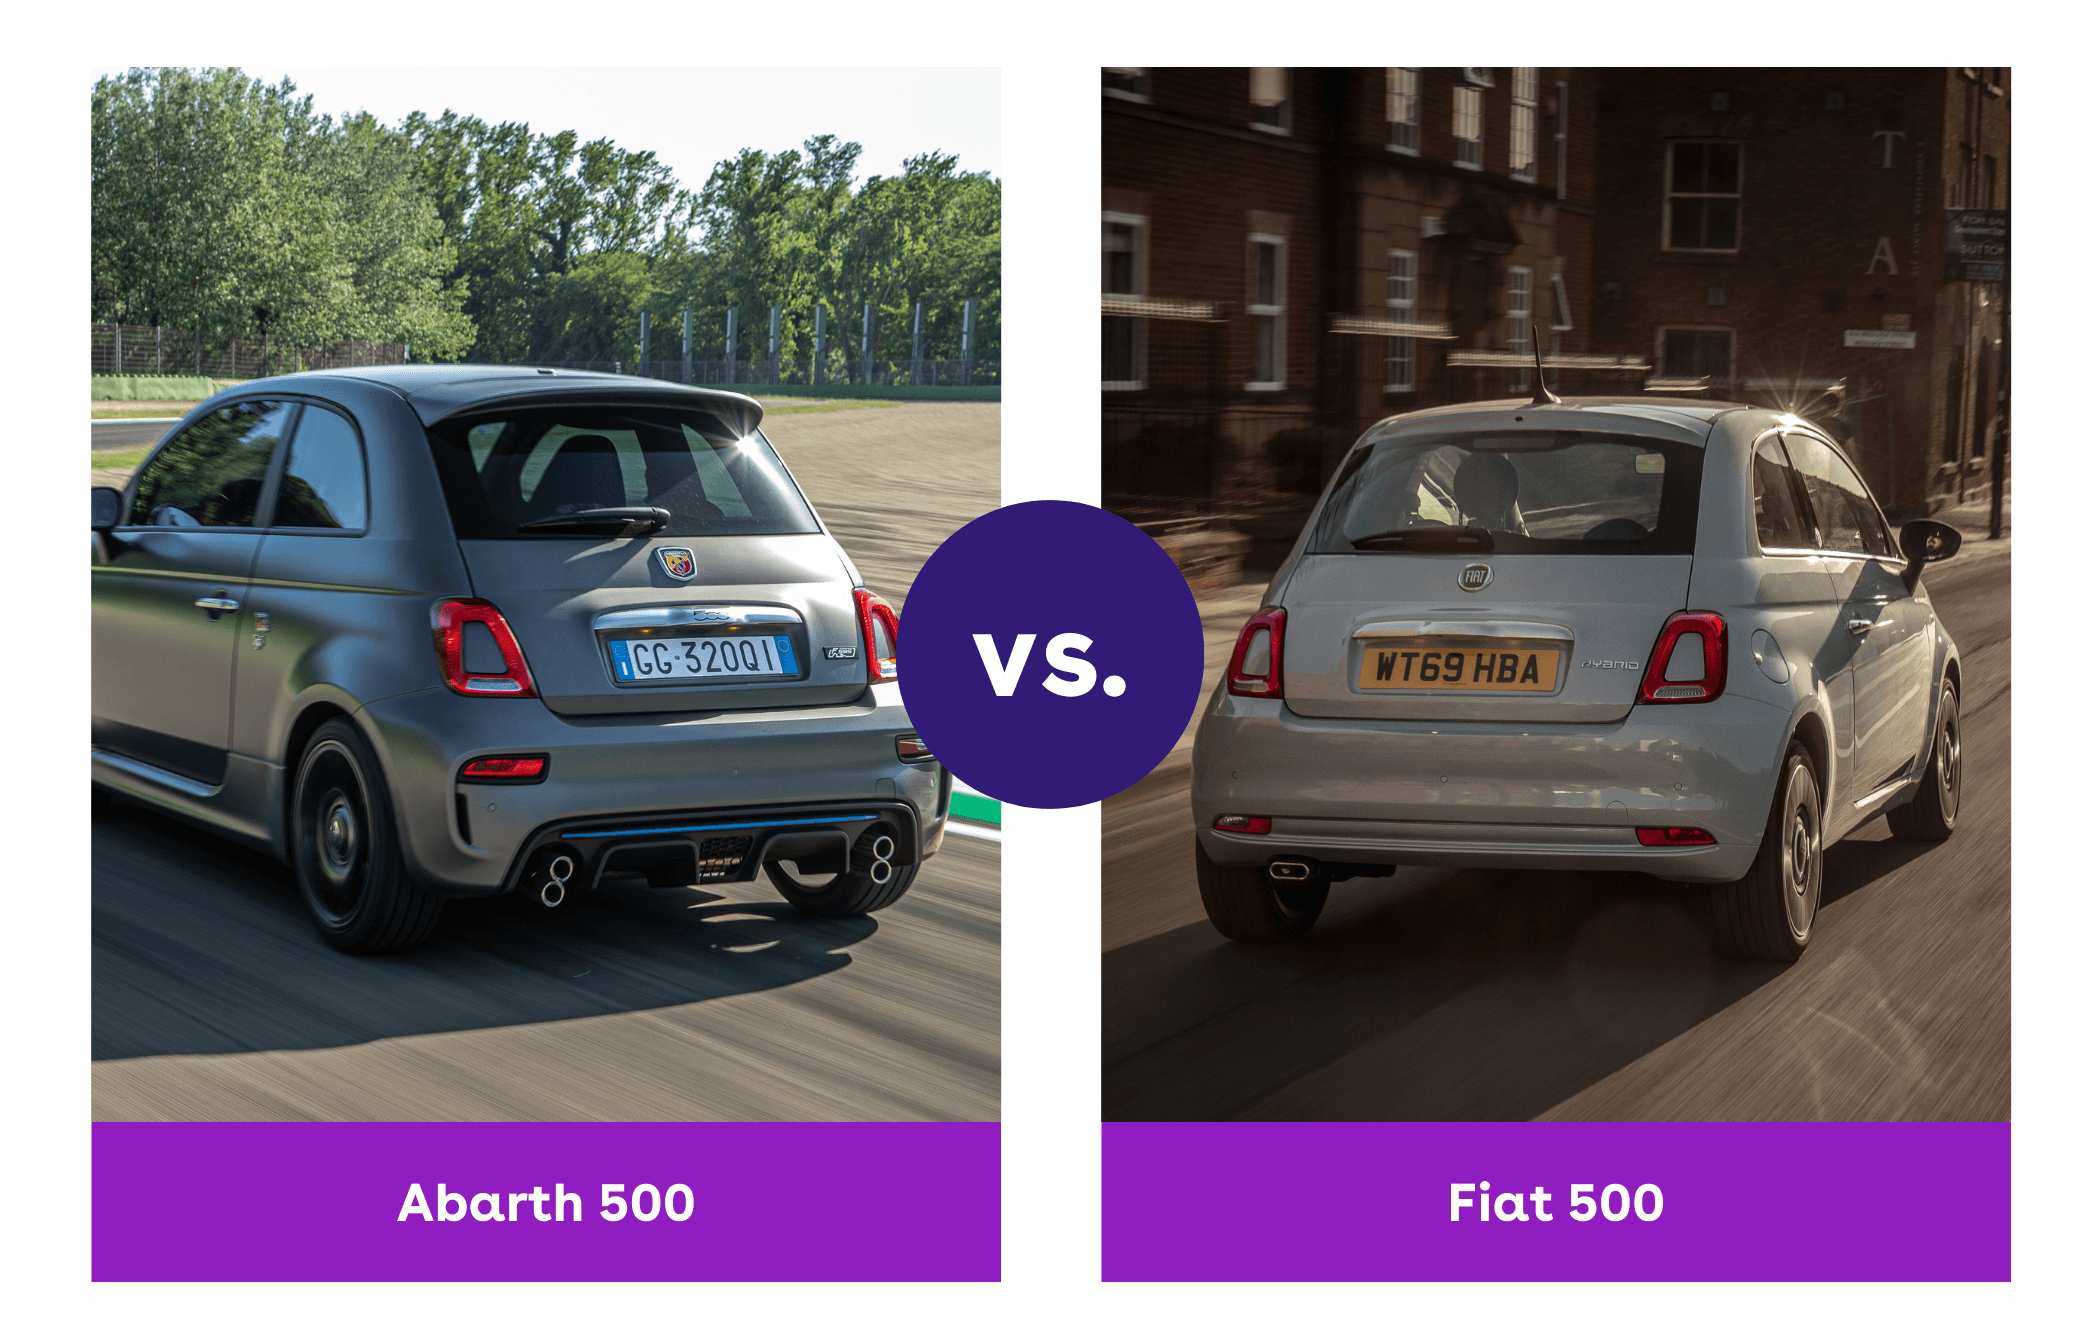 Side-by-side view of Abarth 500 and Fiat 500 rear